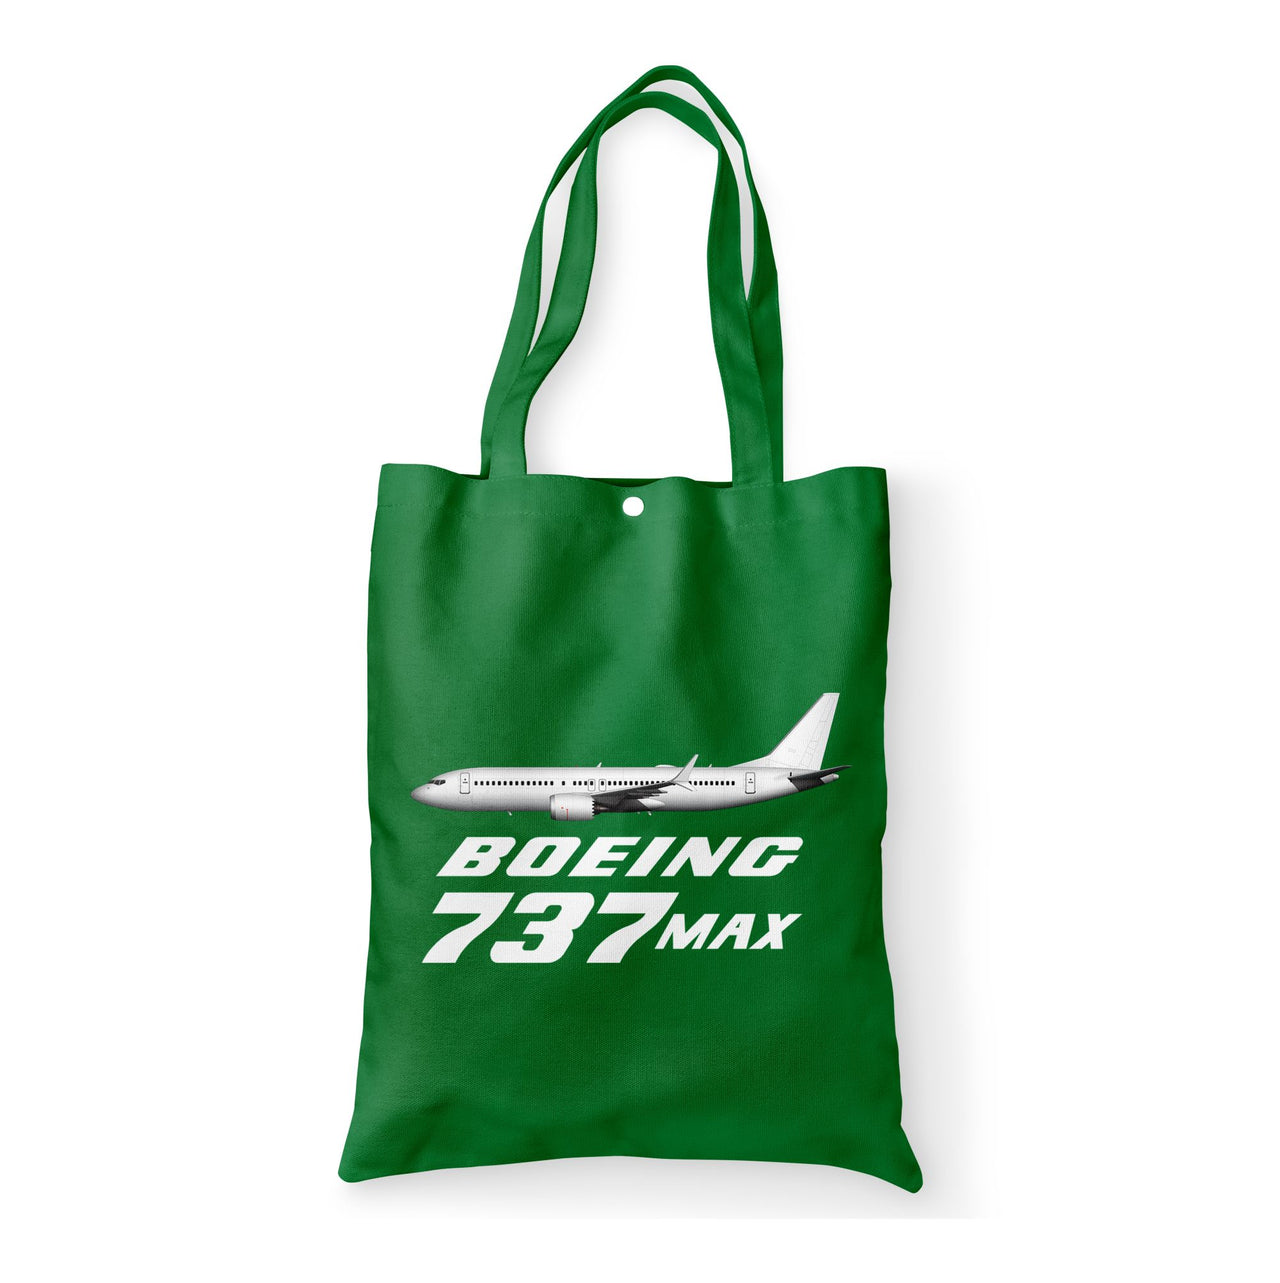 The Boeing 737Max Designed Tote Bags